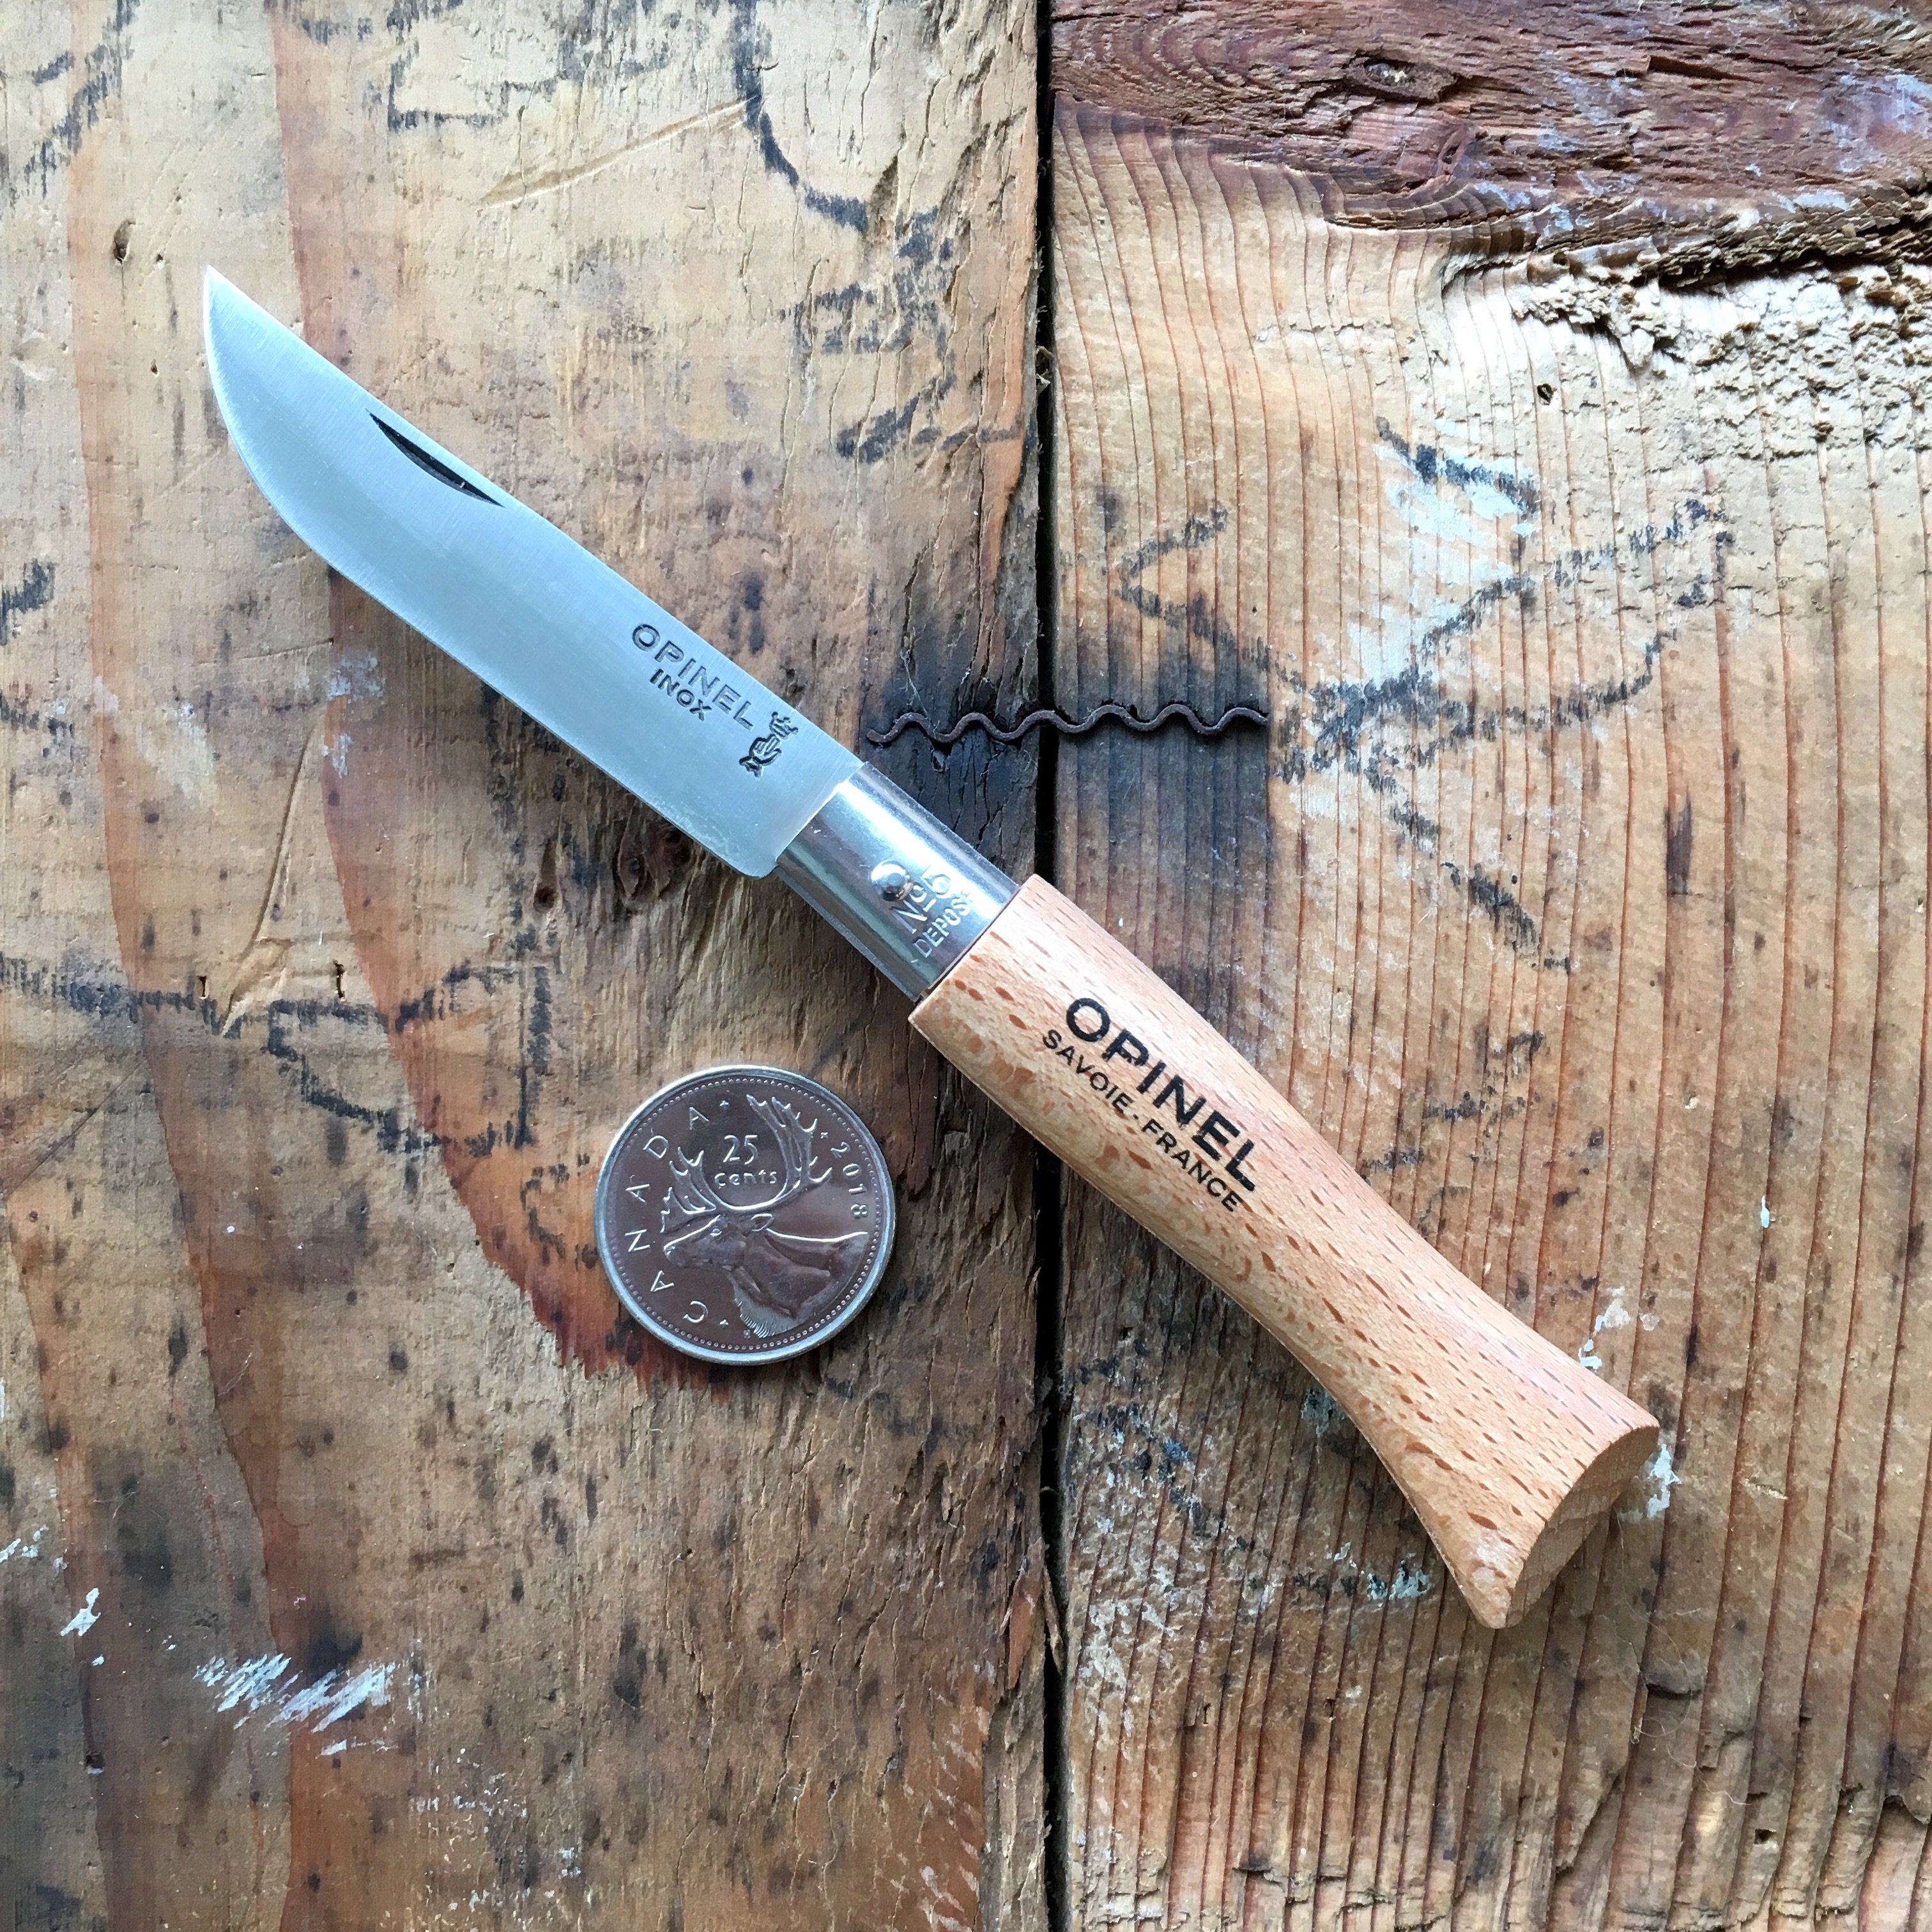 Opinel Stainless Steel Knife No. 6